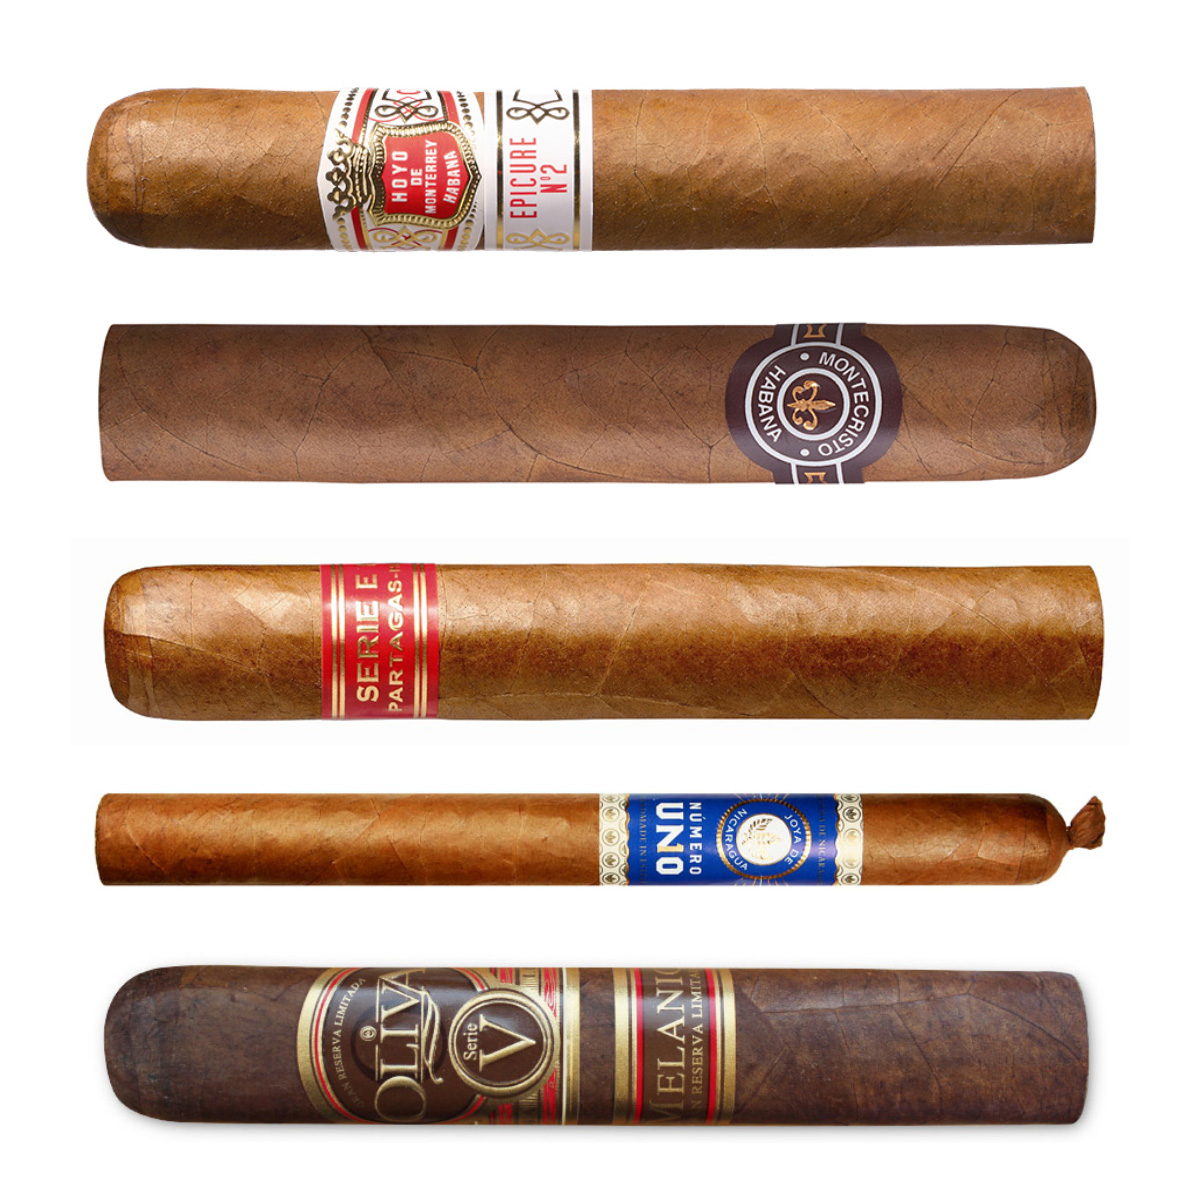 This week's Top 5 cigars from Nick Hammond